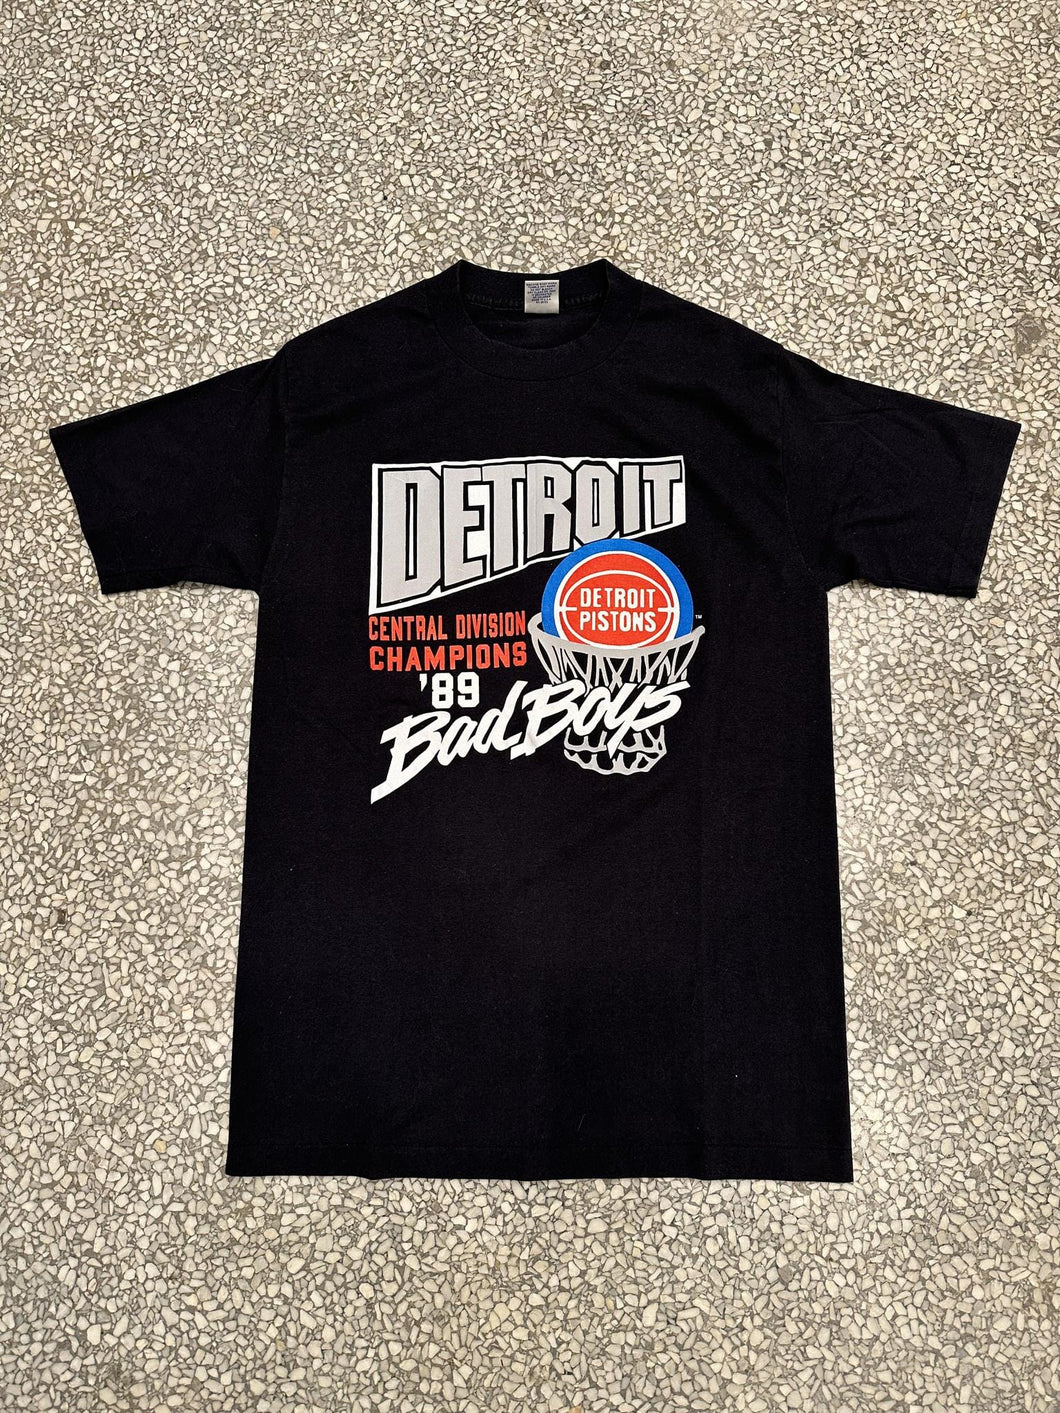 Detroit Pistons Vintage 1989 Bad Boys Central Division Champions Trench Tee Black ABC Vintage 